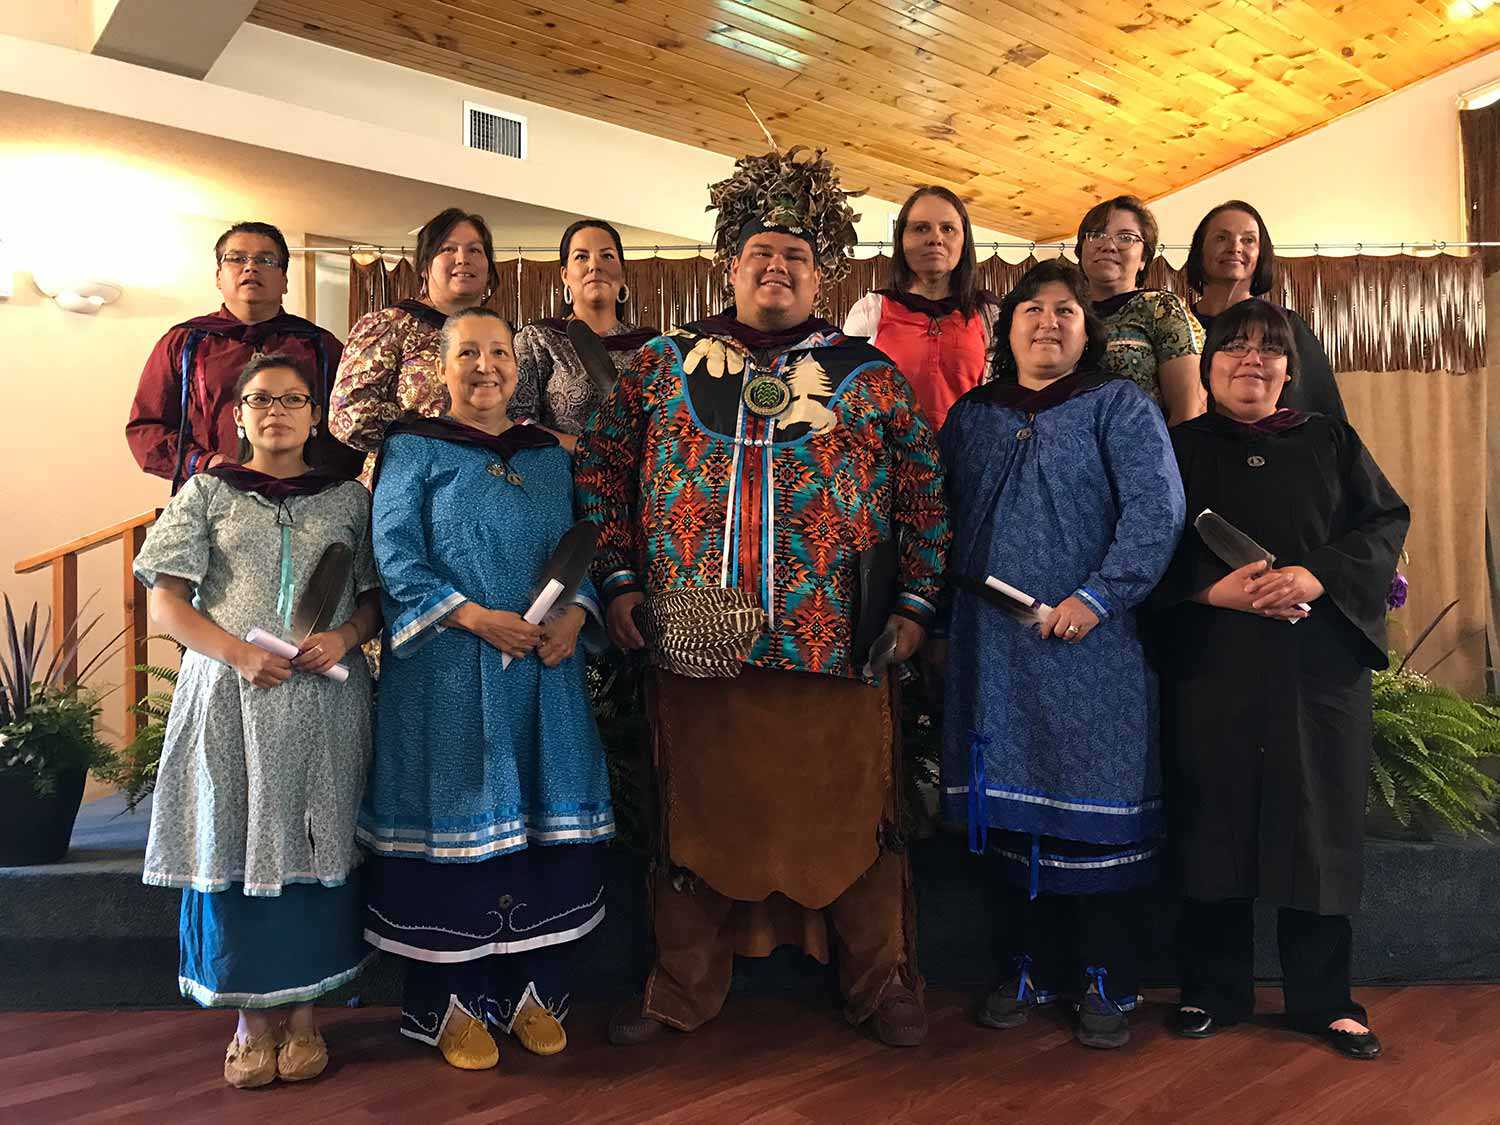 Inaugural convocation of students from the Bachelor of Arts in Ogwehoweh Languages program at Six Nations Polytechnic, June 7, 2017. (Photo: Six Nations Polytechnic)